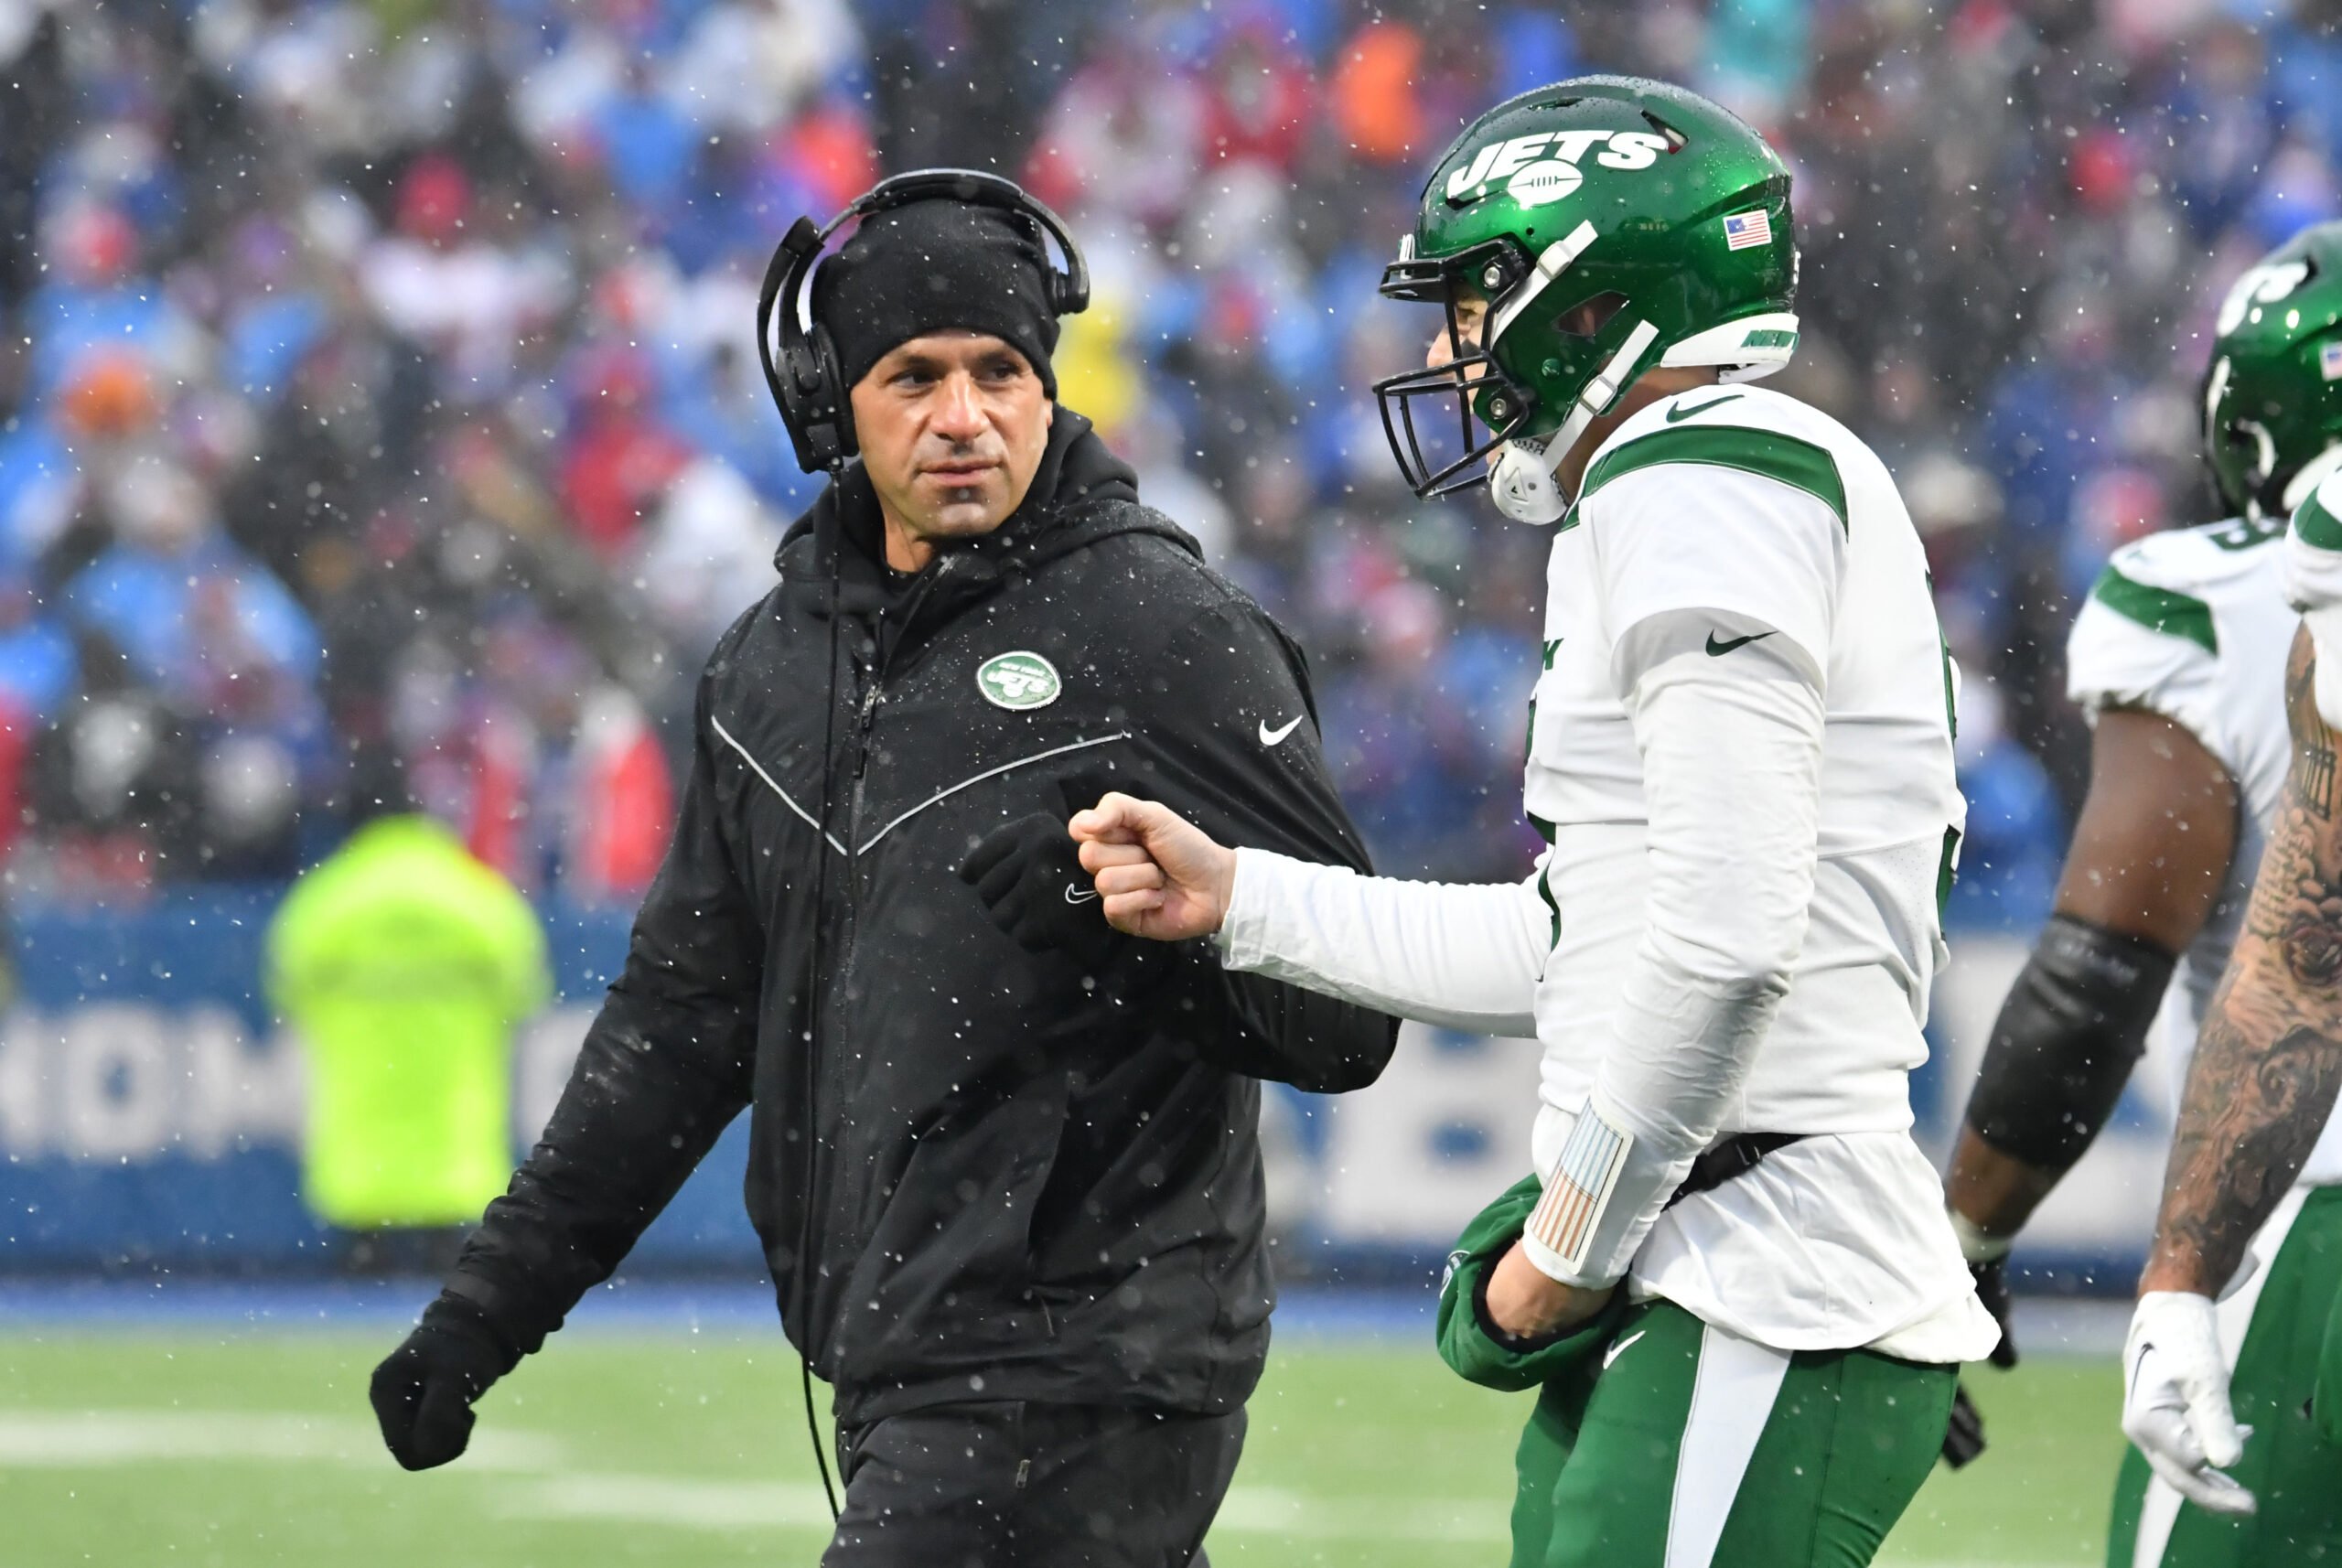 New York Jets vs. Seattle Seahawks betting odds for NFL Week 17 game